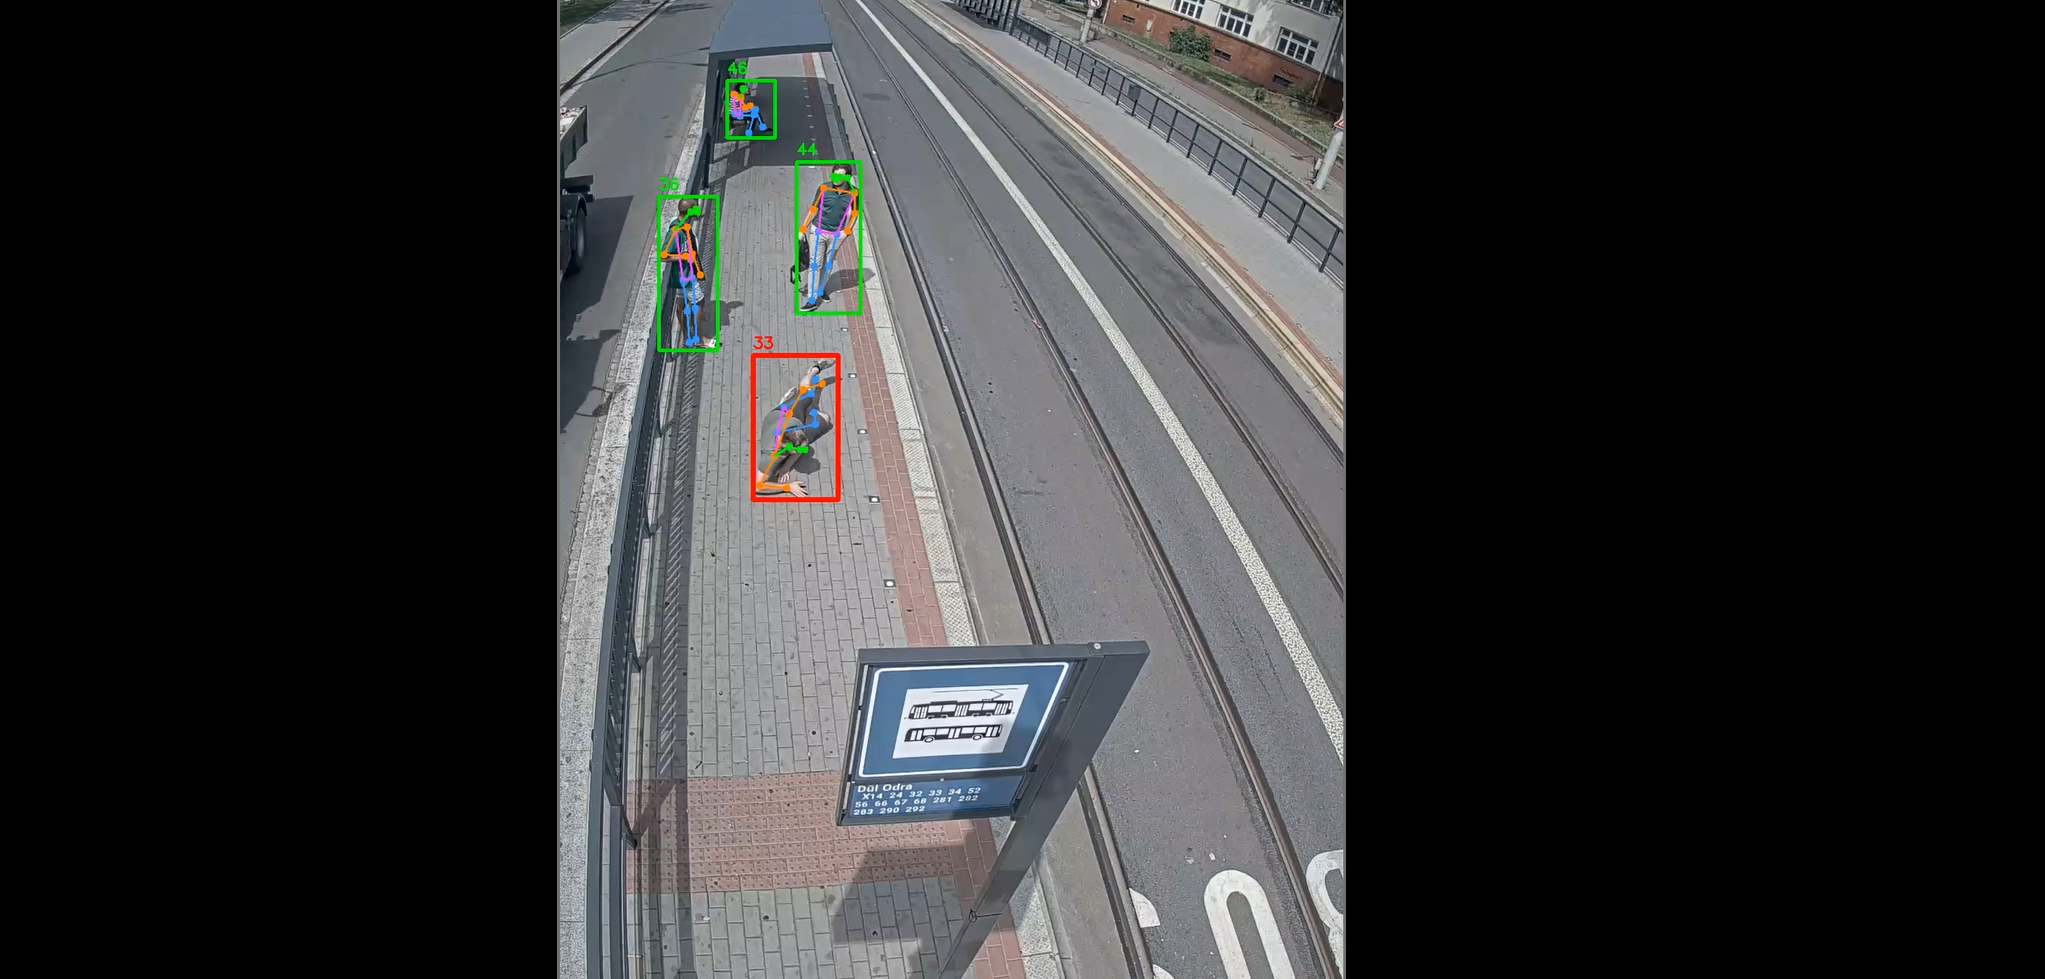 Eago is testing AI on the city's camera system in Ostrava